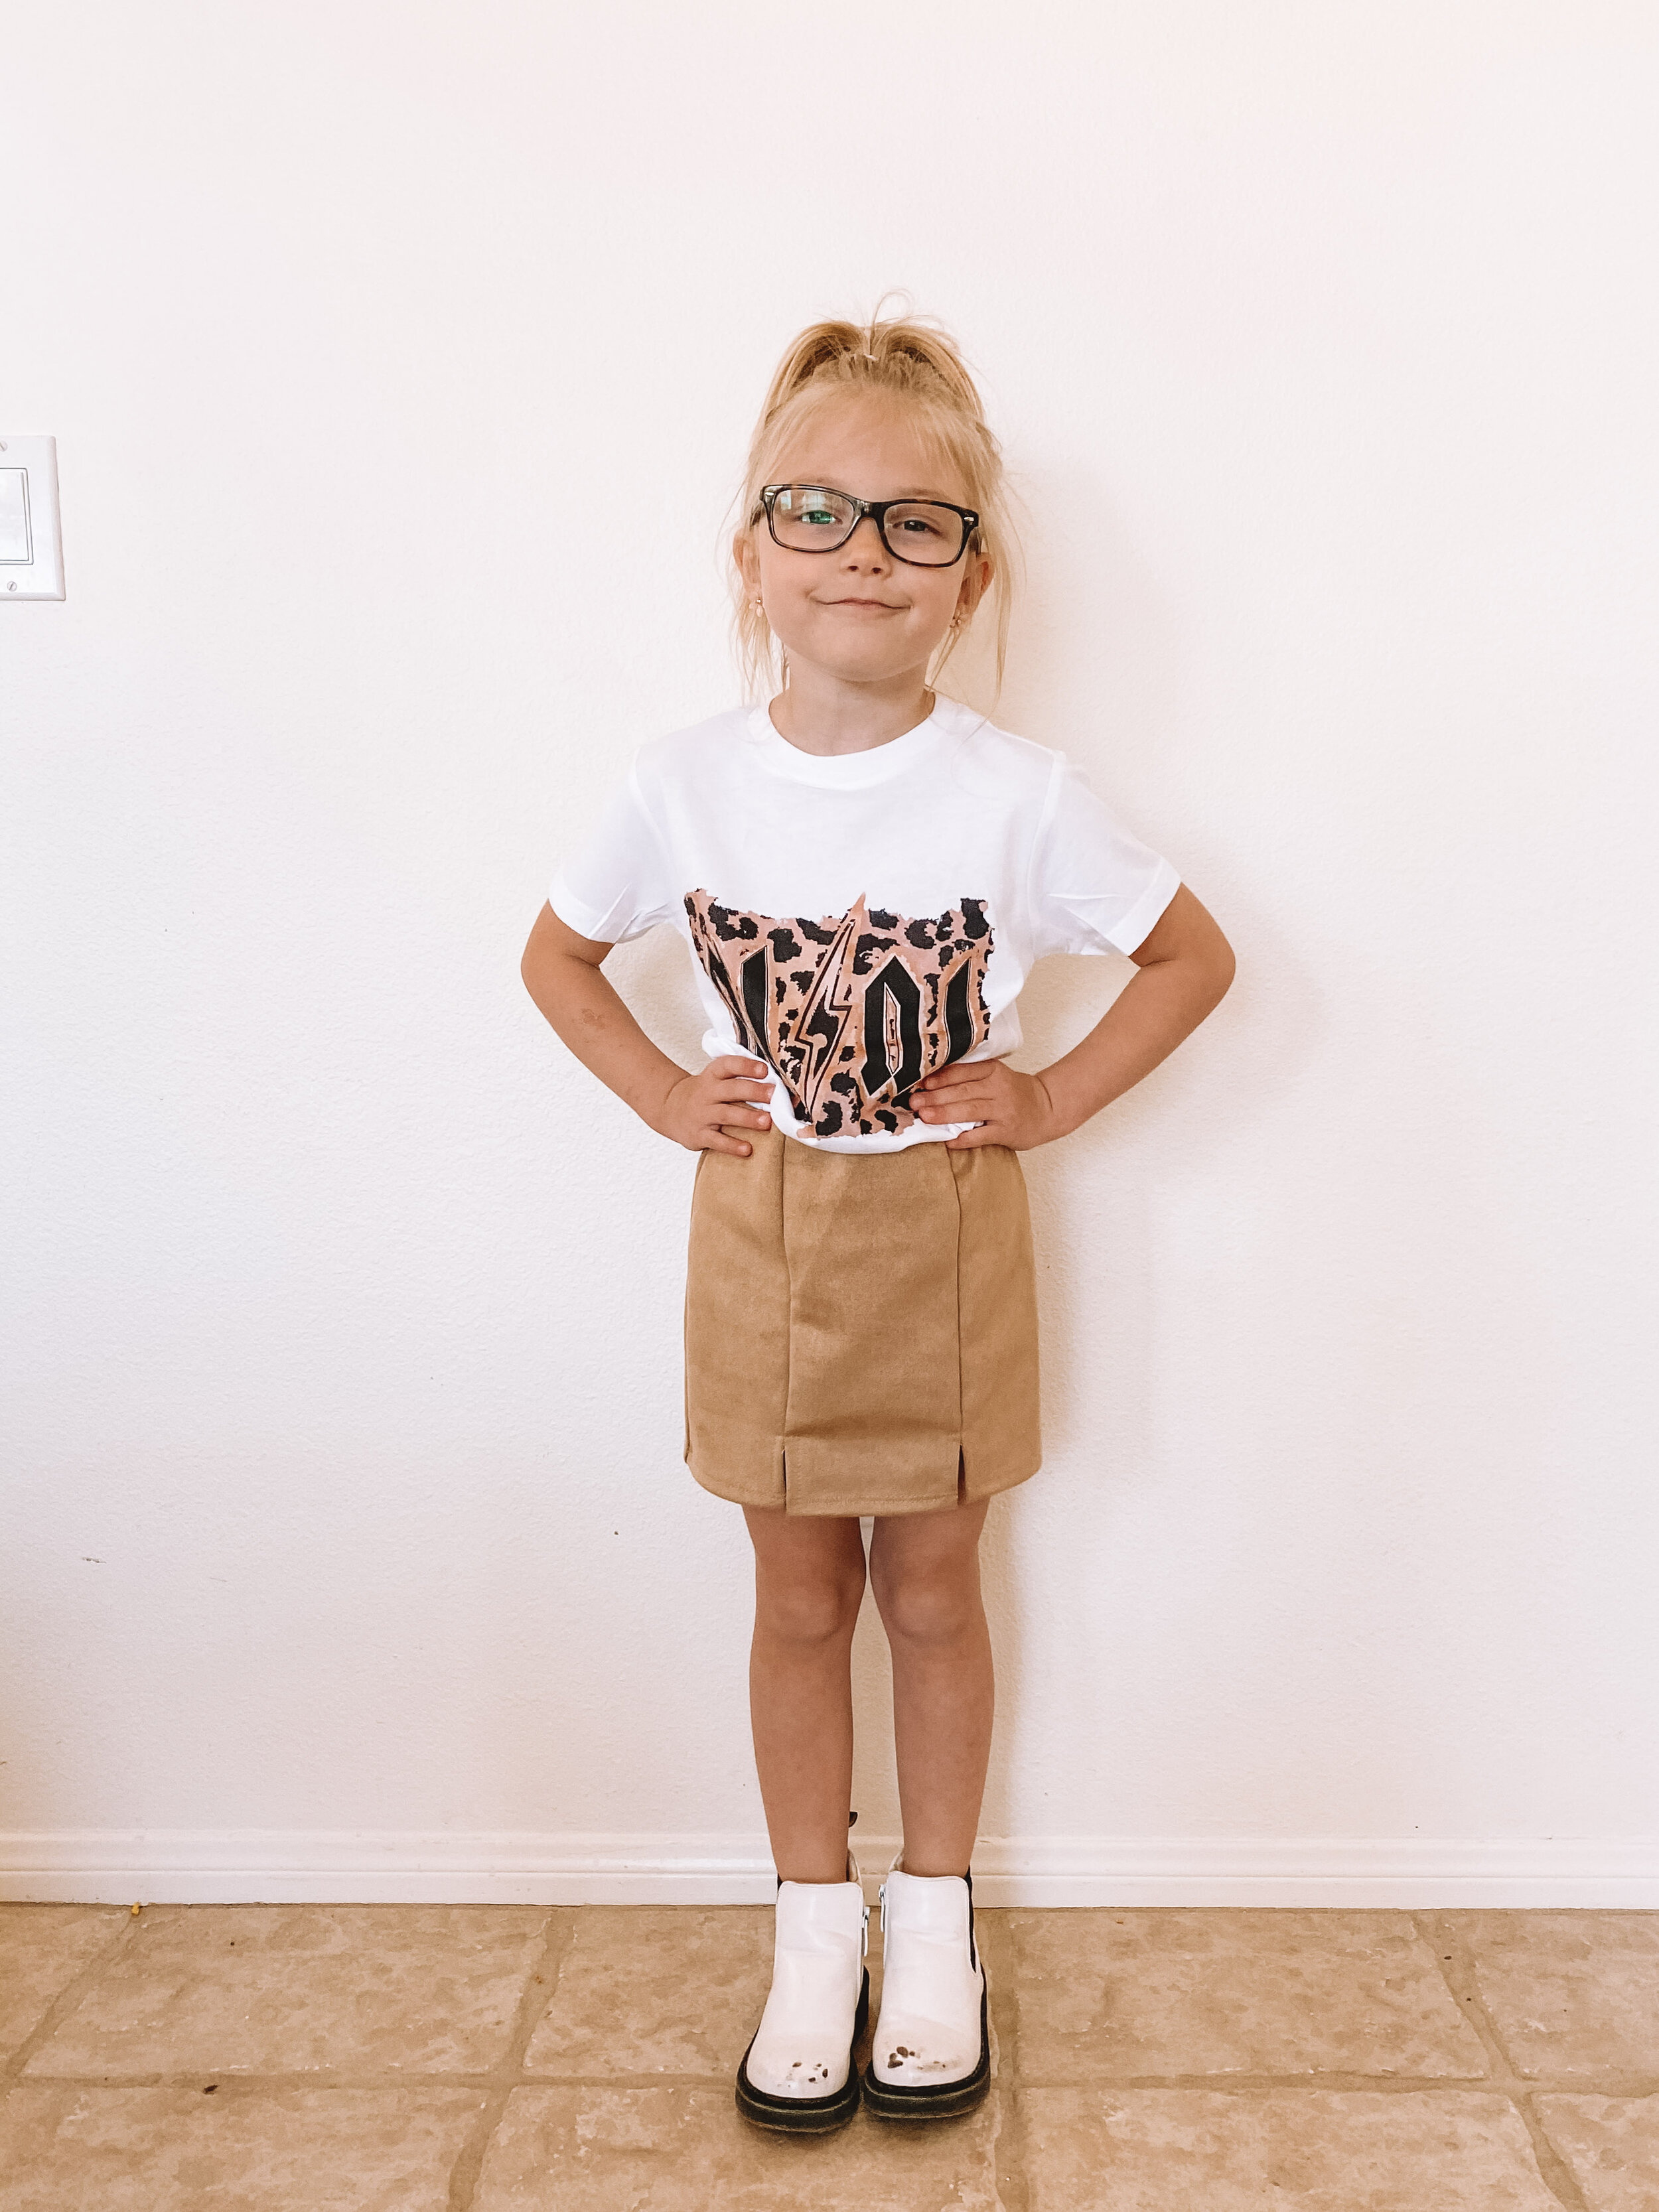 Cute Kids Skirt - Mommy and Me Matching Clothes - Little Mia Bella